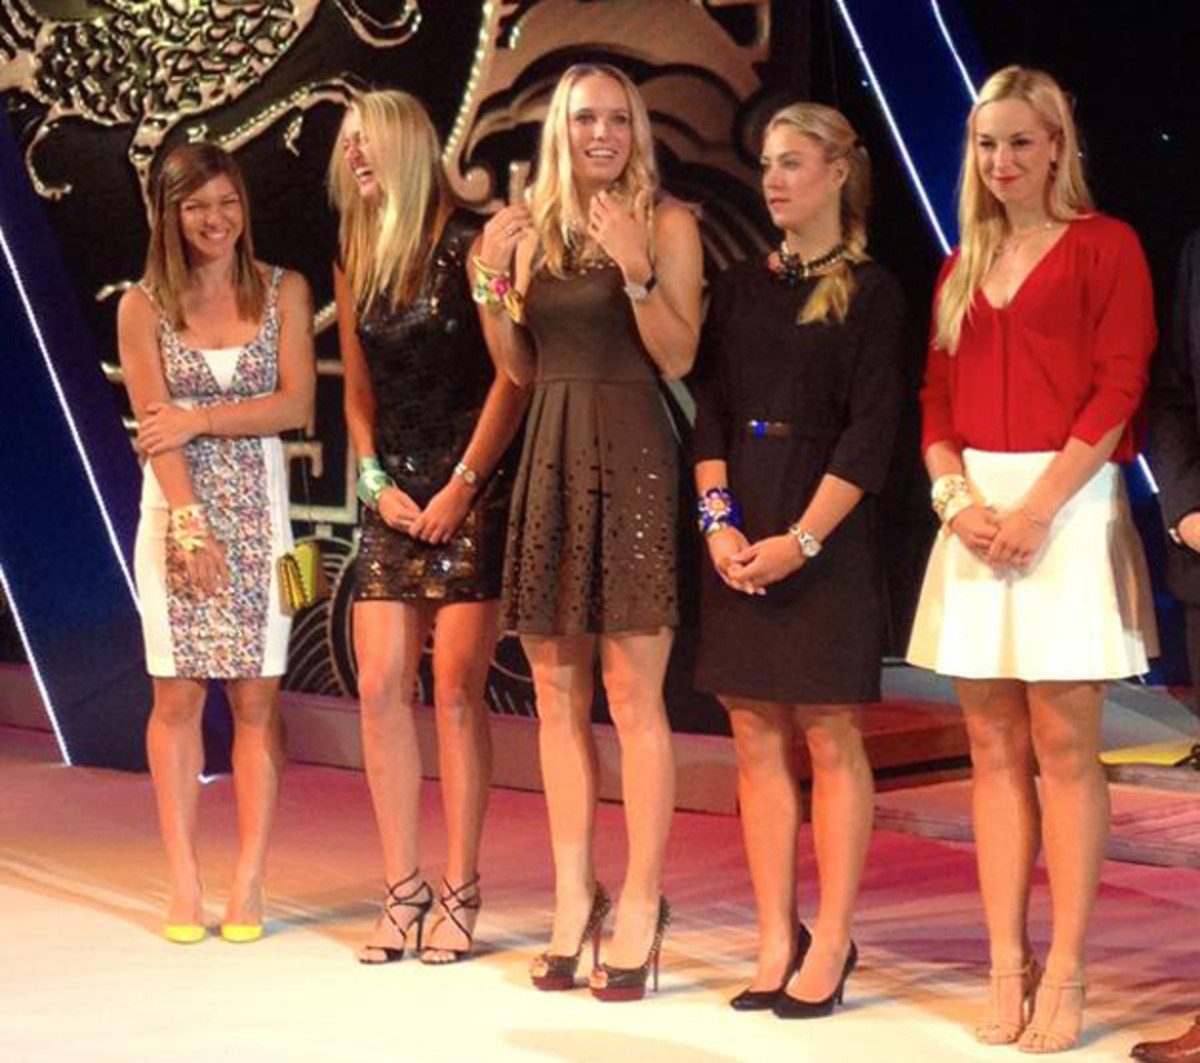 The women share a laugh at the Wuhan Open player's party. 